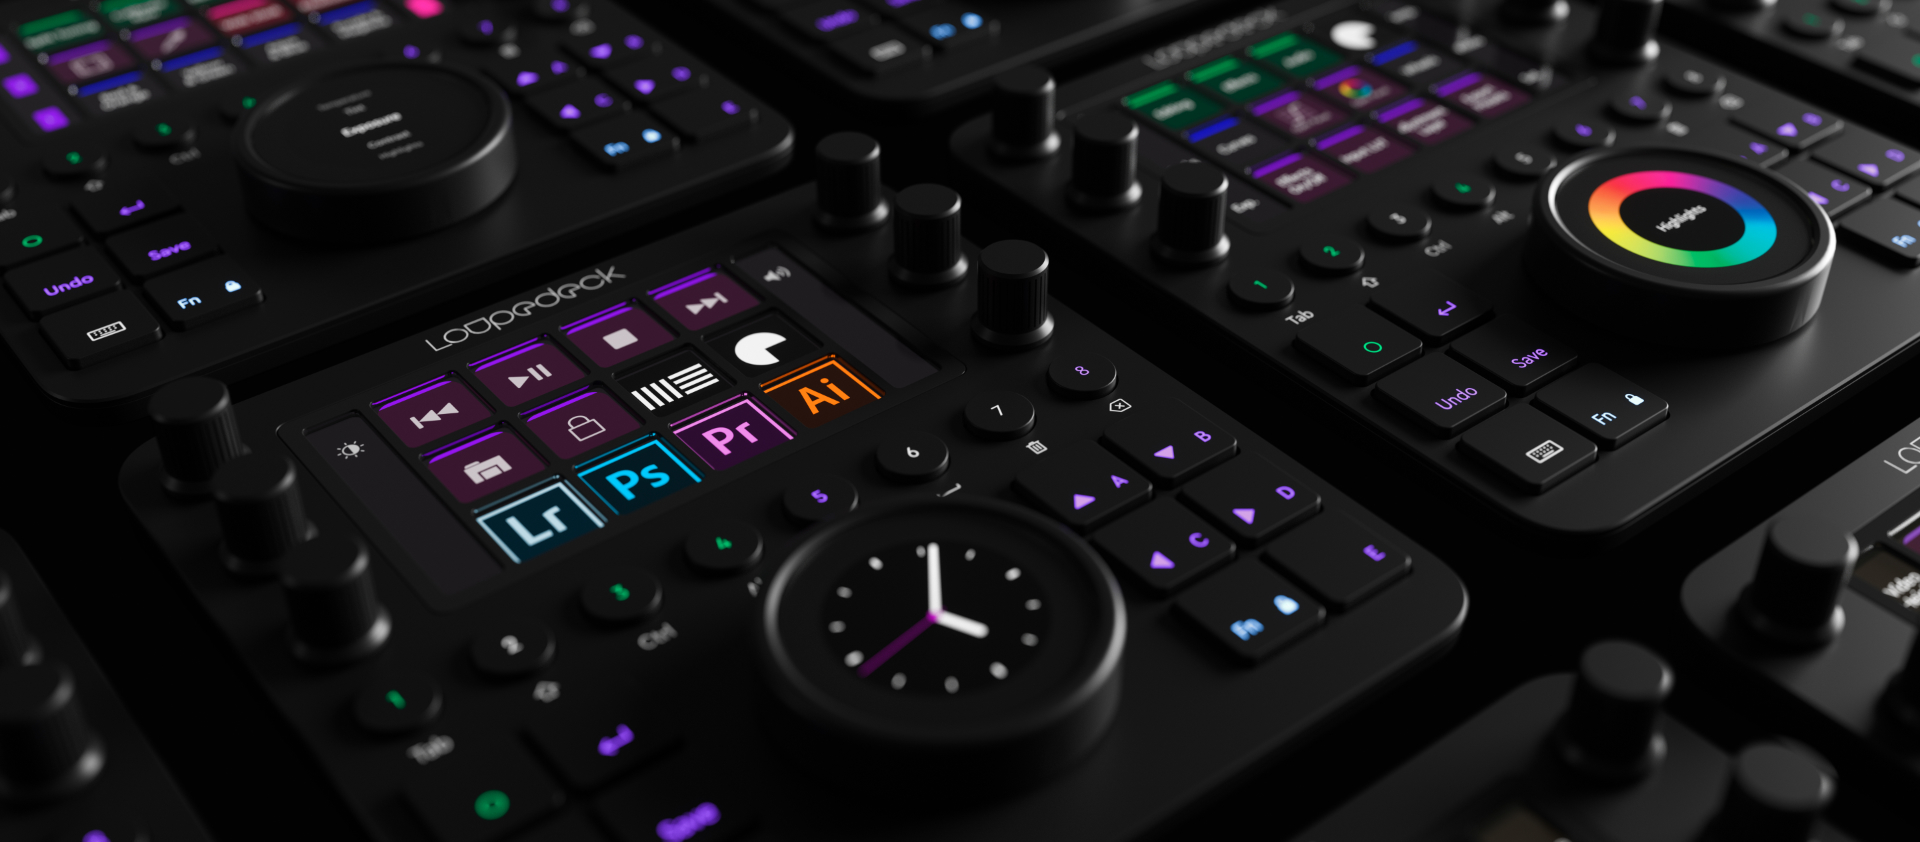 New Loupedeck CT – Control (Almost) All Your Creative Apps | CineD